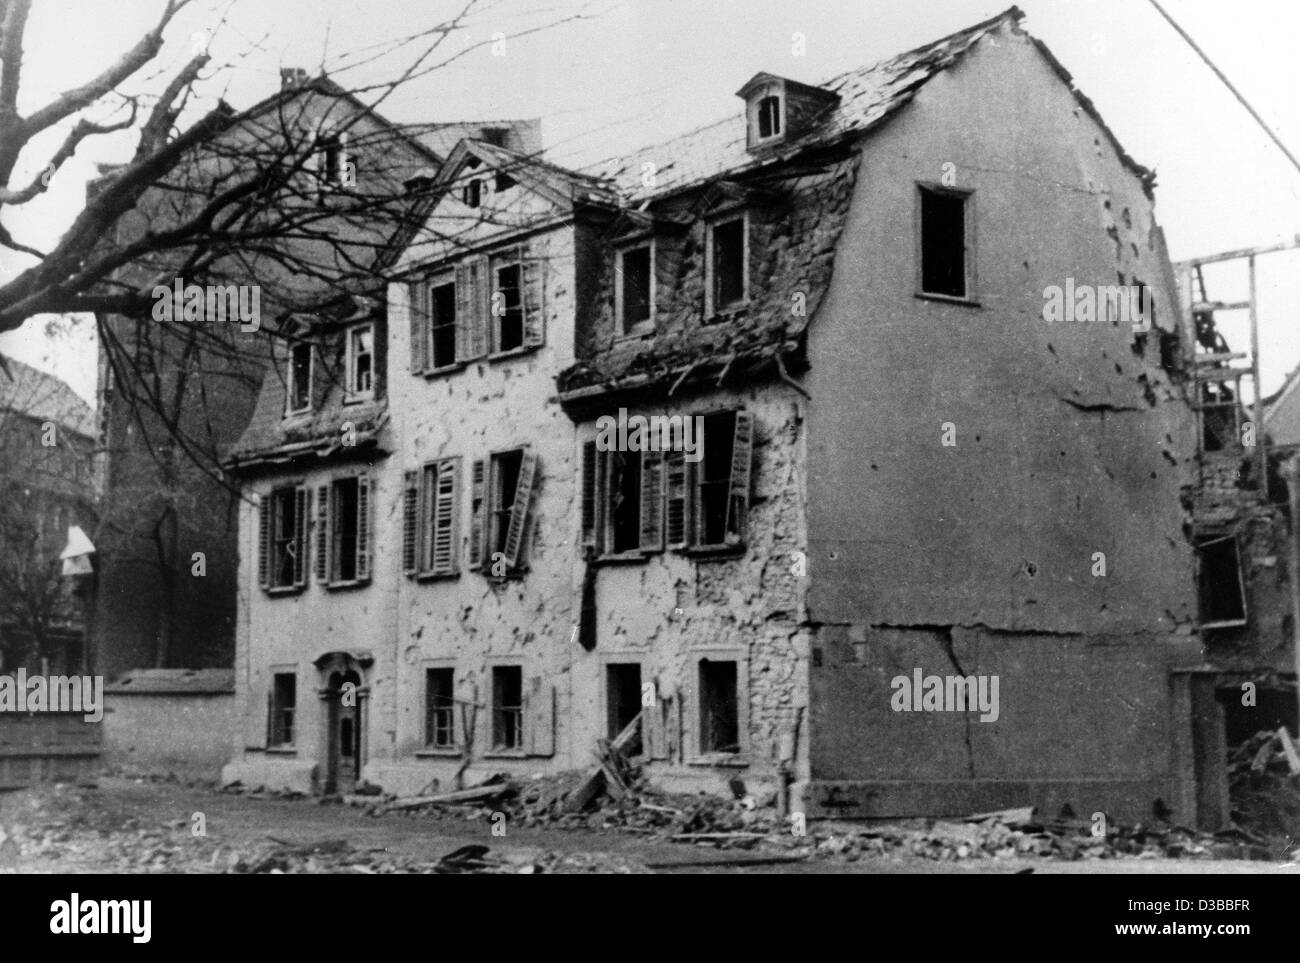 (dpa files) - An undated filer shows the Schiller House in Weimar, which was severely damaged by English and American bombs in February 1945. The house was built in 1777 and was Schiller's last domicile from 1802 until his death in 1805. Stock Photo